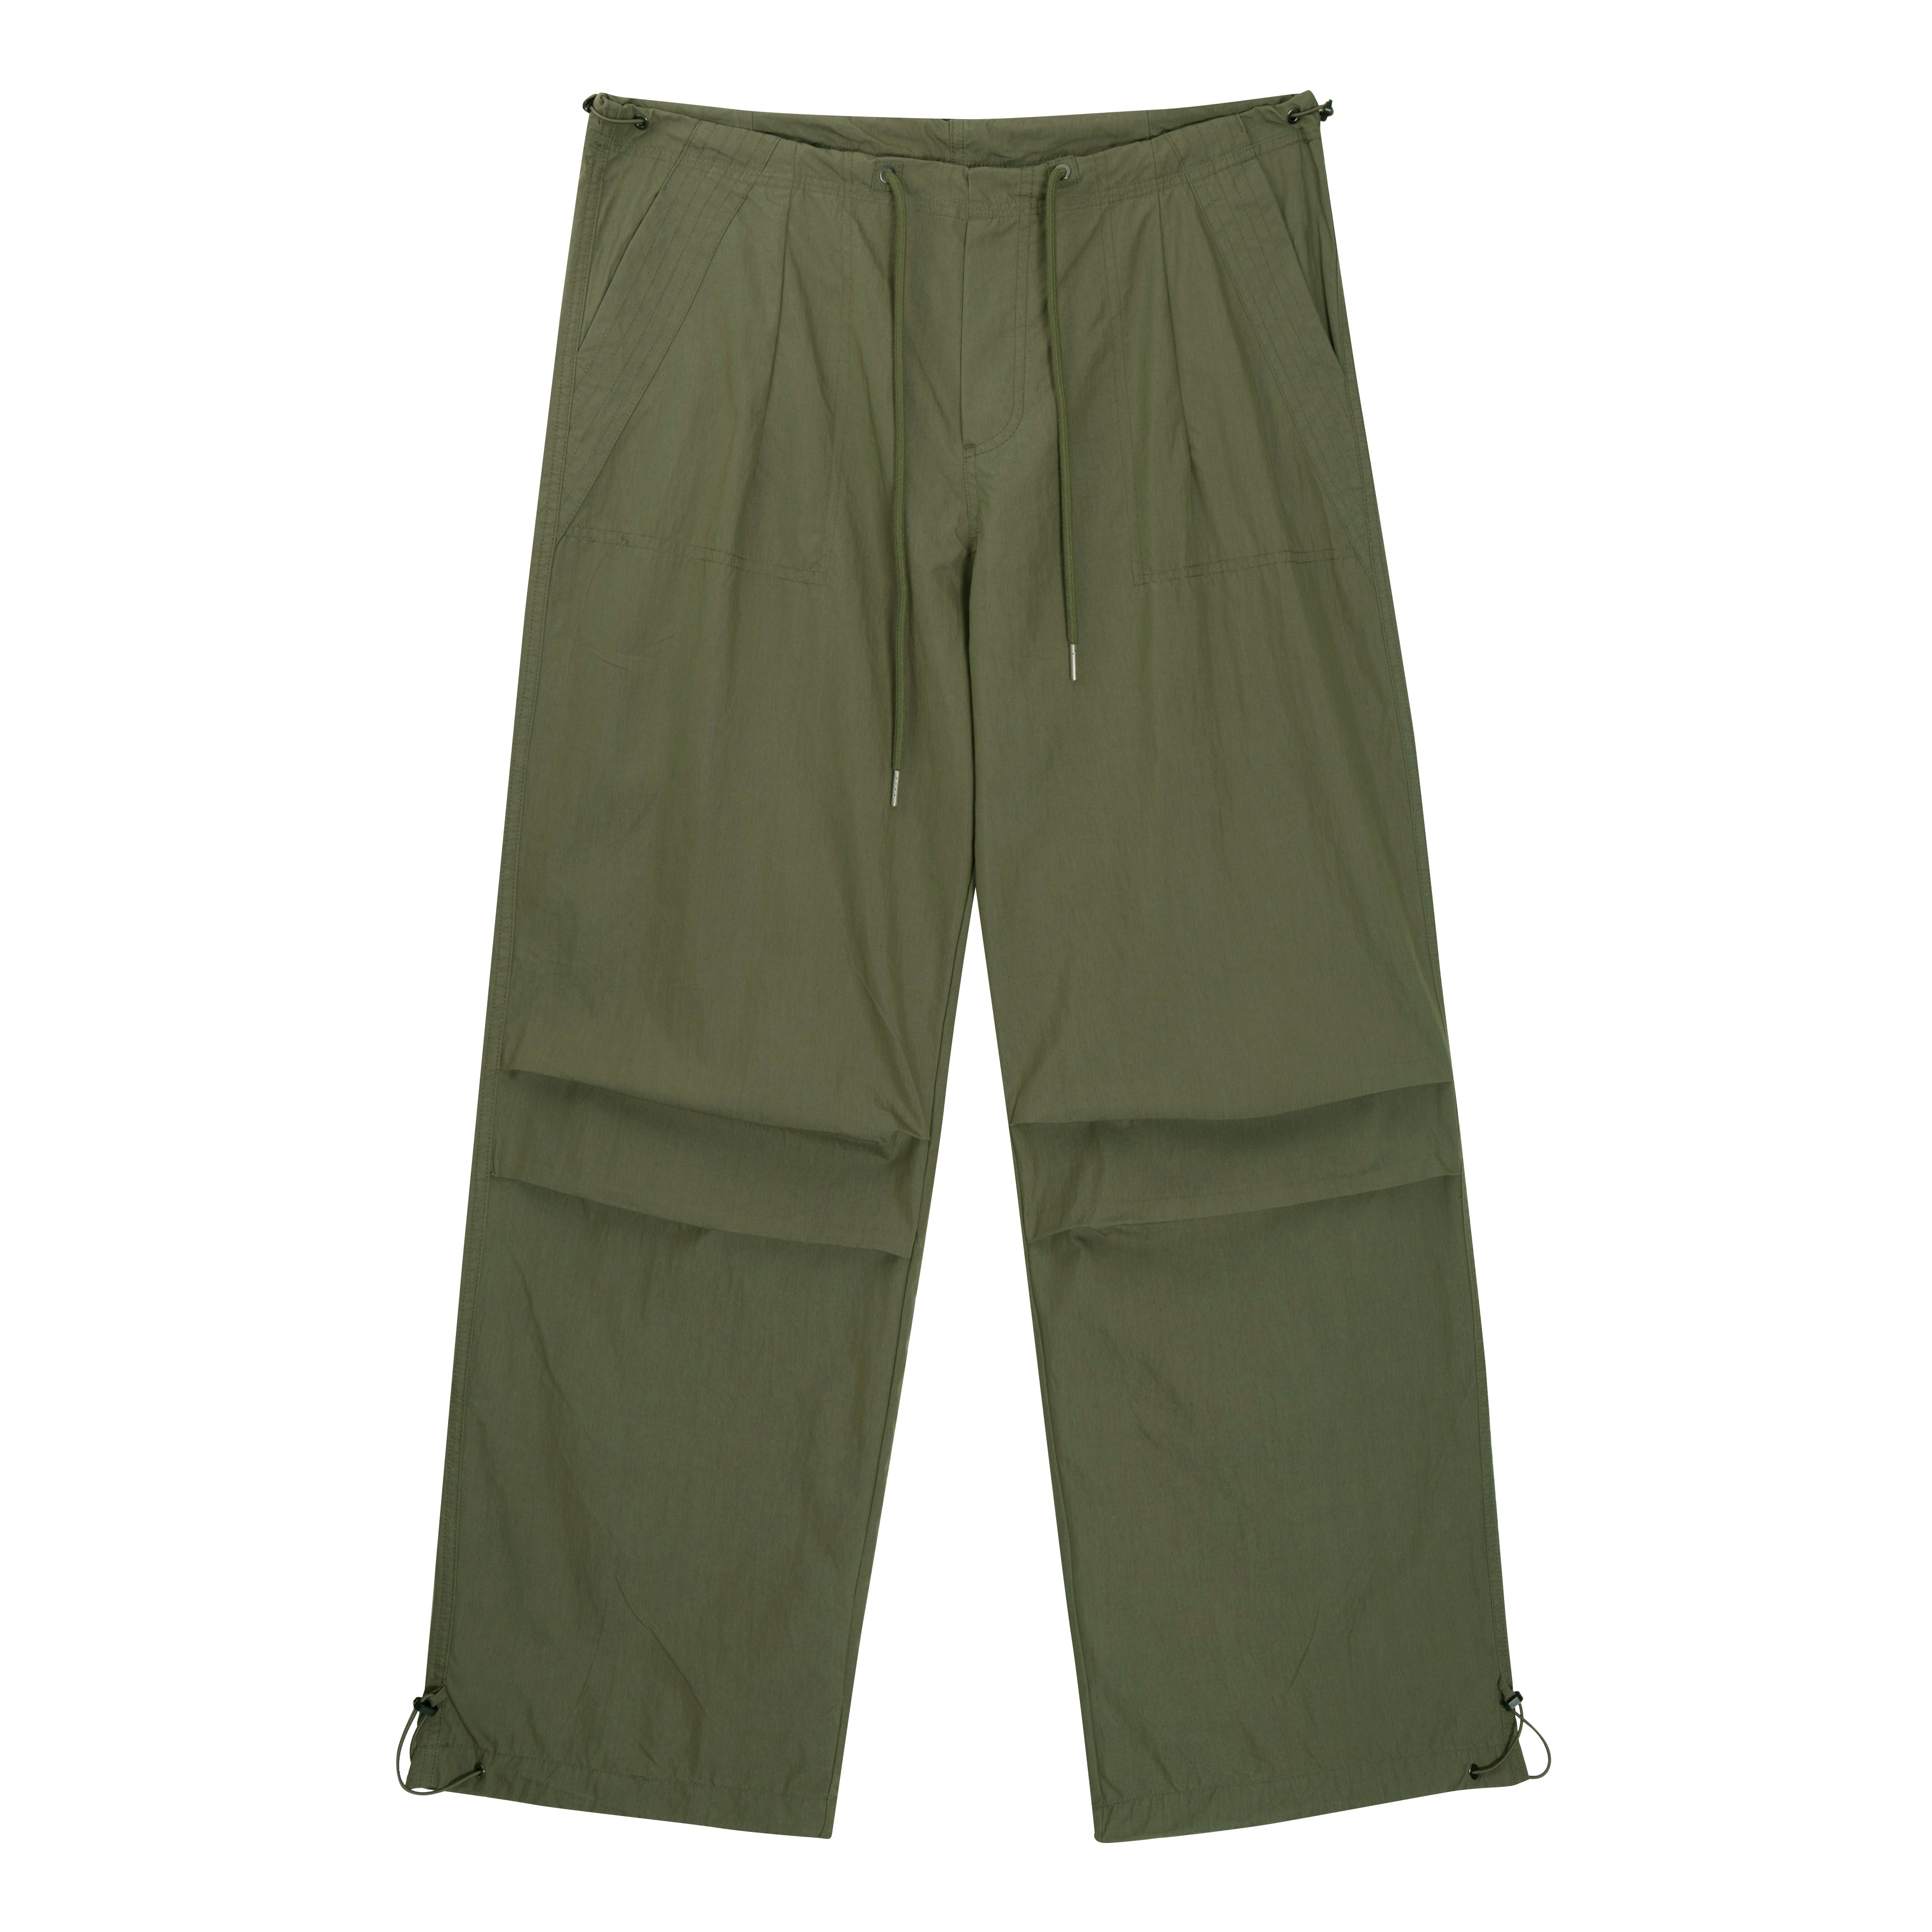 Tech Baggy Trousers - Olive